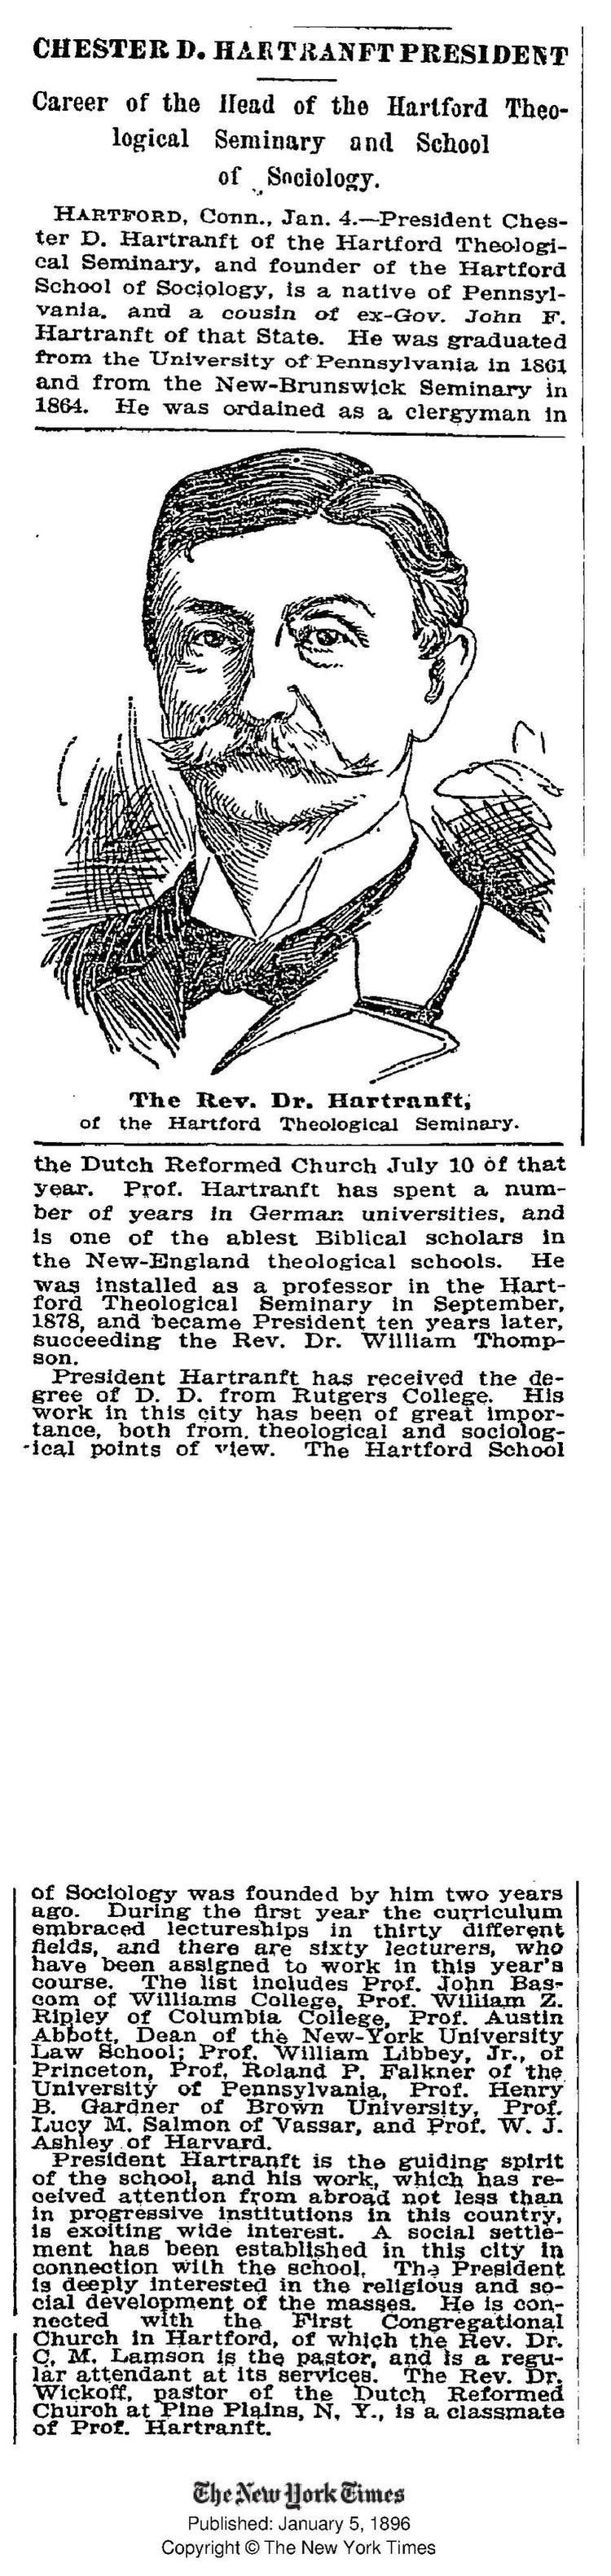 Chester David Hartranft FileArticle about Chester David Hartranft in The New York Times